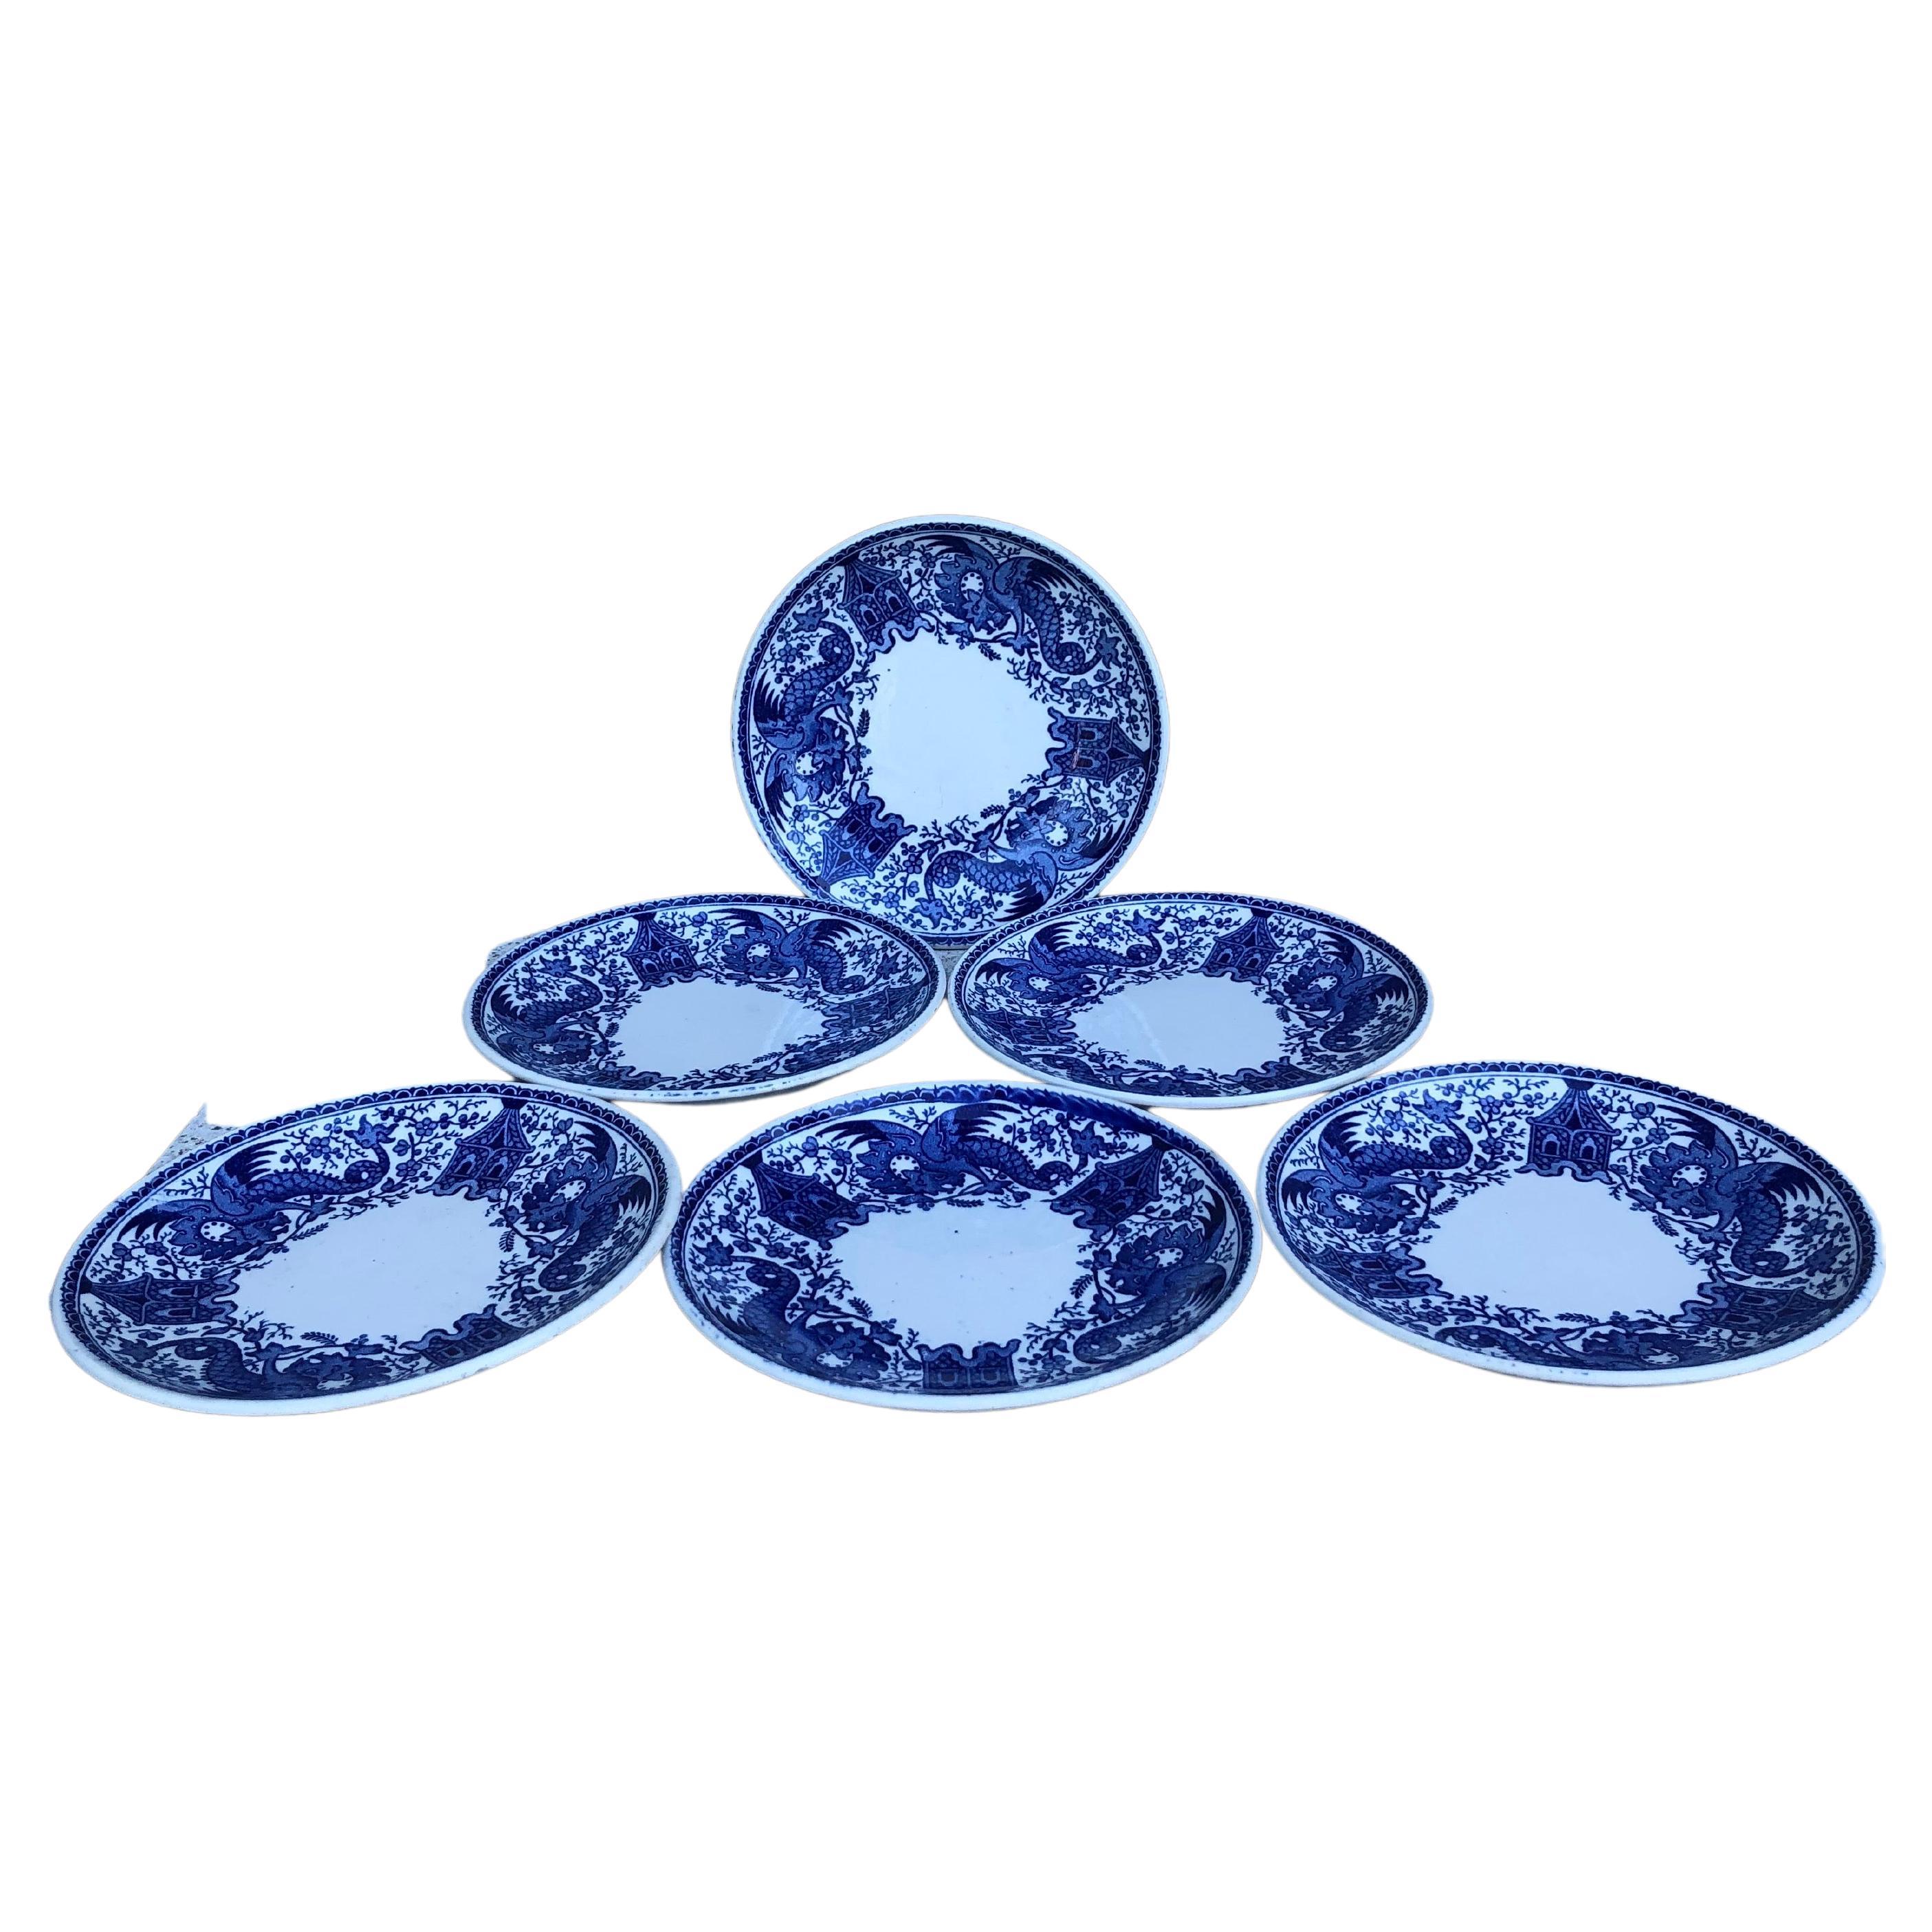 Set of 6 small blue & white small plates dragons signed Sarreguemines.
Measure: 6 inches diameter.